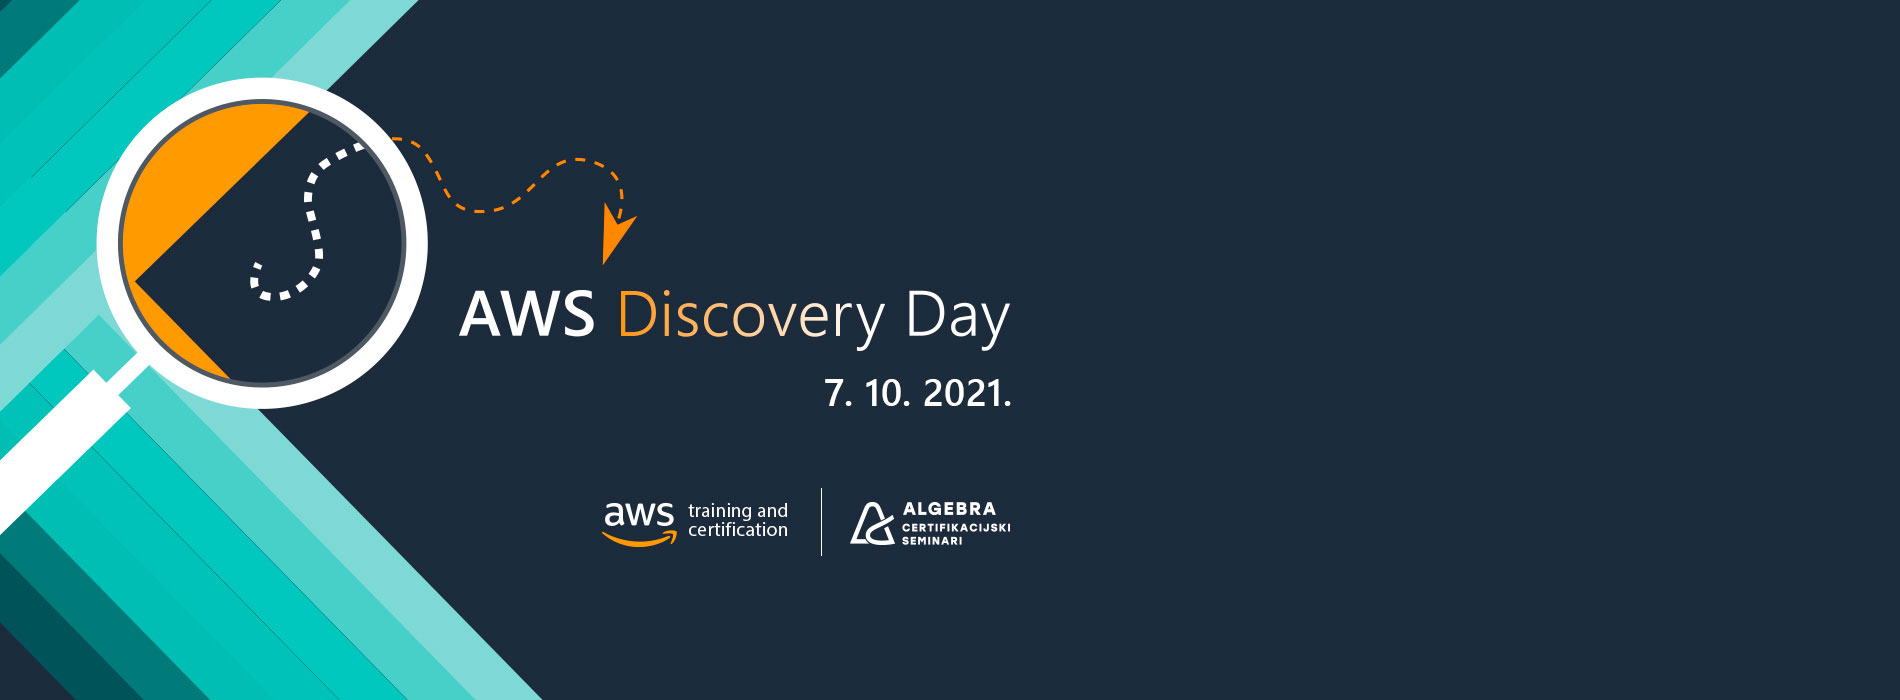 Image for AWS Discovery Day